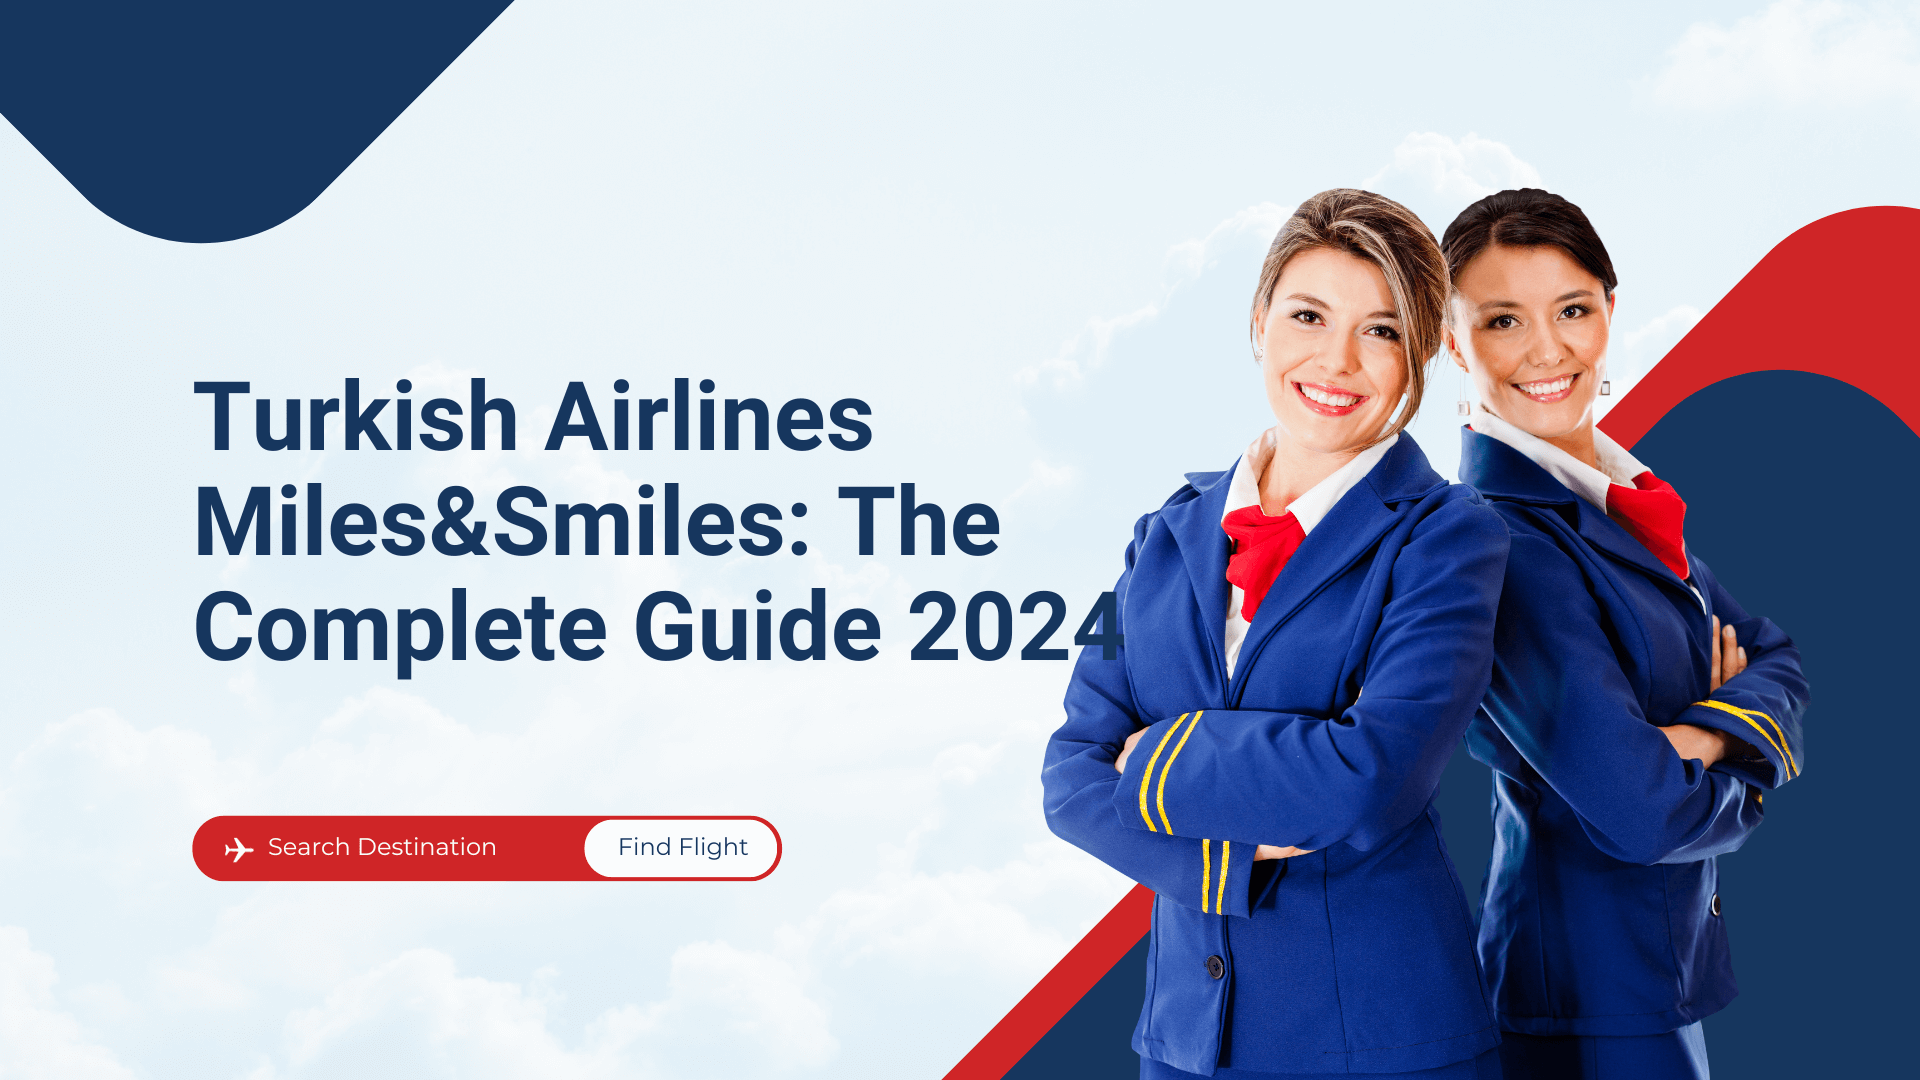 Turkish Airlines Miles&Smiles: The Complete Guide 2024